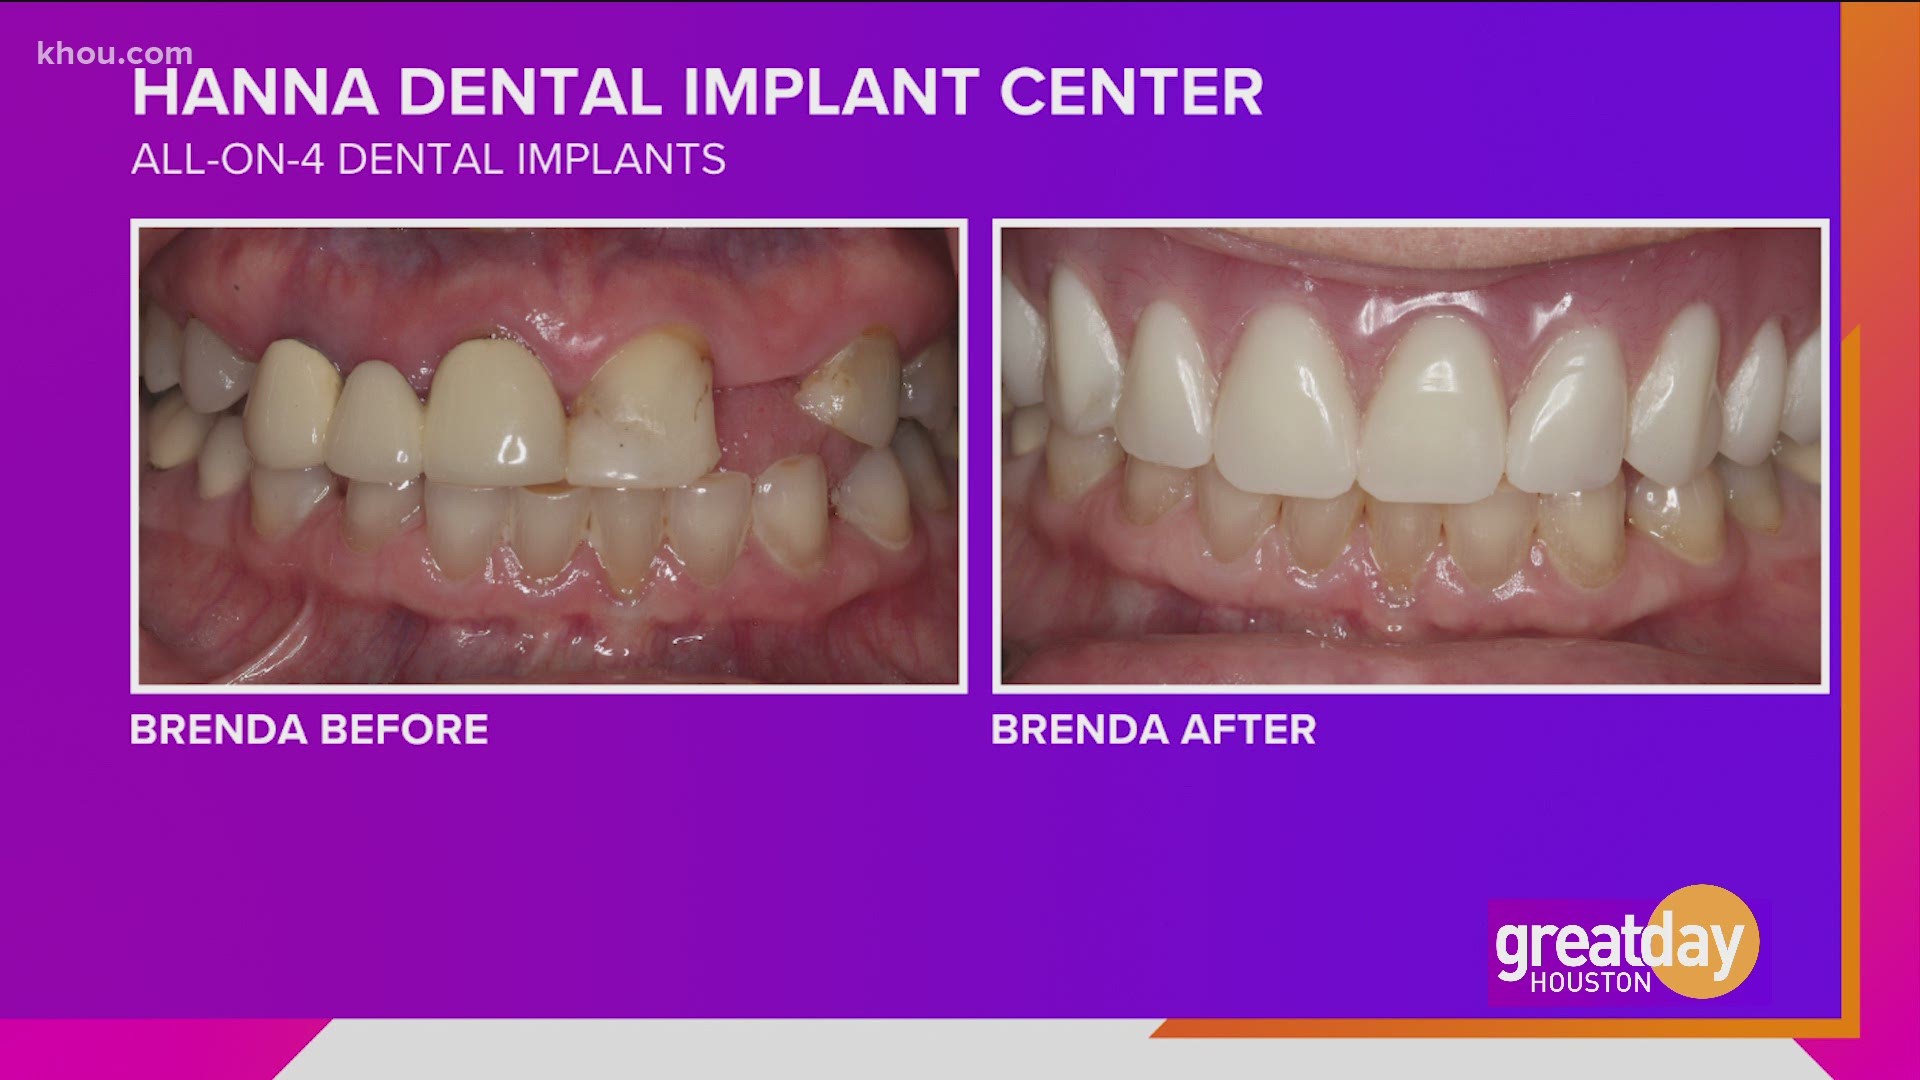 Dr. Raouf Hanna gave life-changing dental implants to Brenda Gibson through the Hanna Dental Implant Center